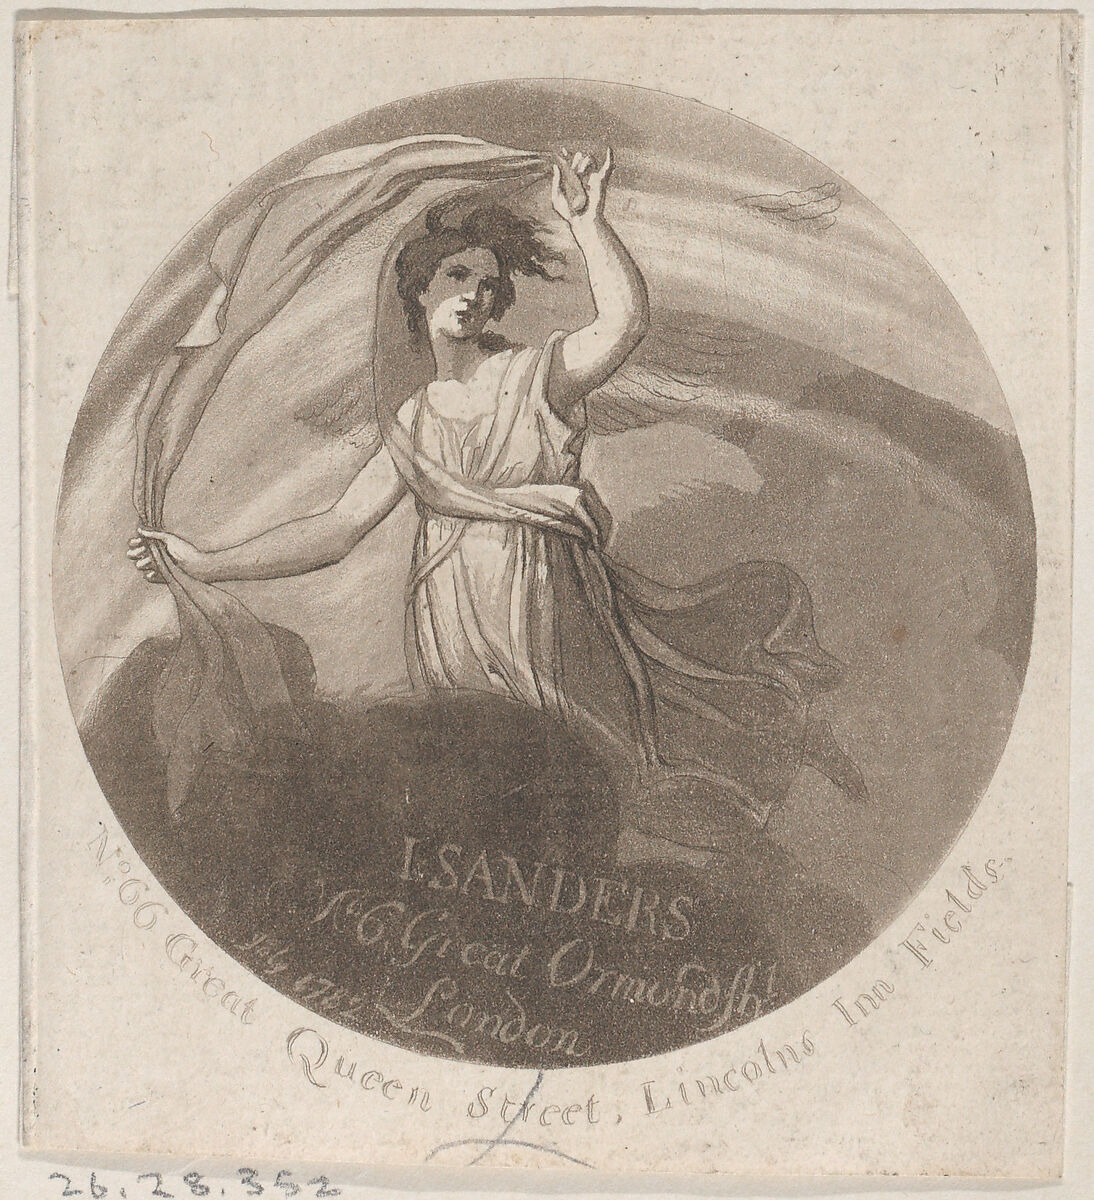 Trade Card for J. Sanders, Printmaker, Anonymous, British, 18th century, Commercial Lithograph 